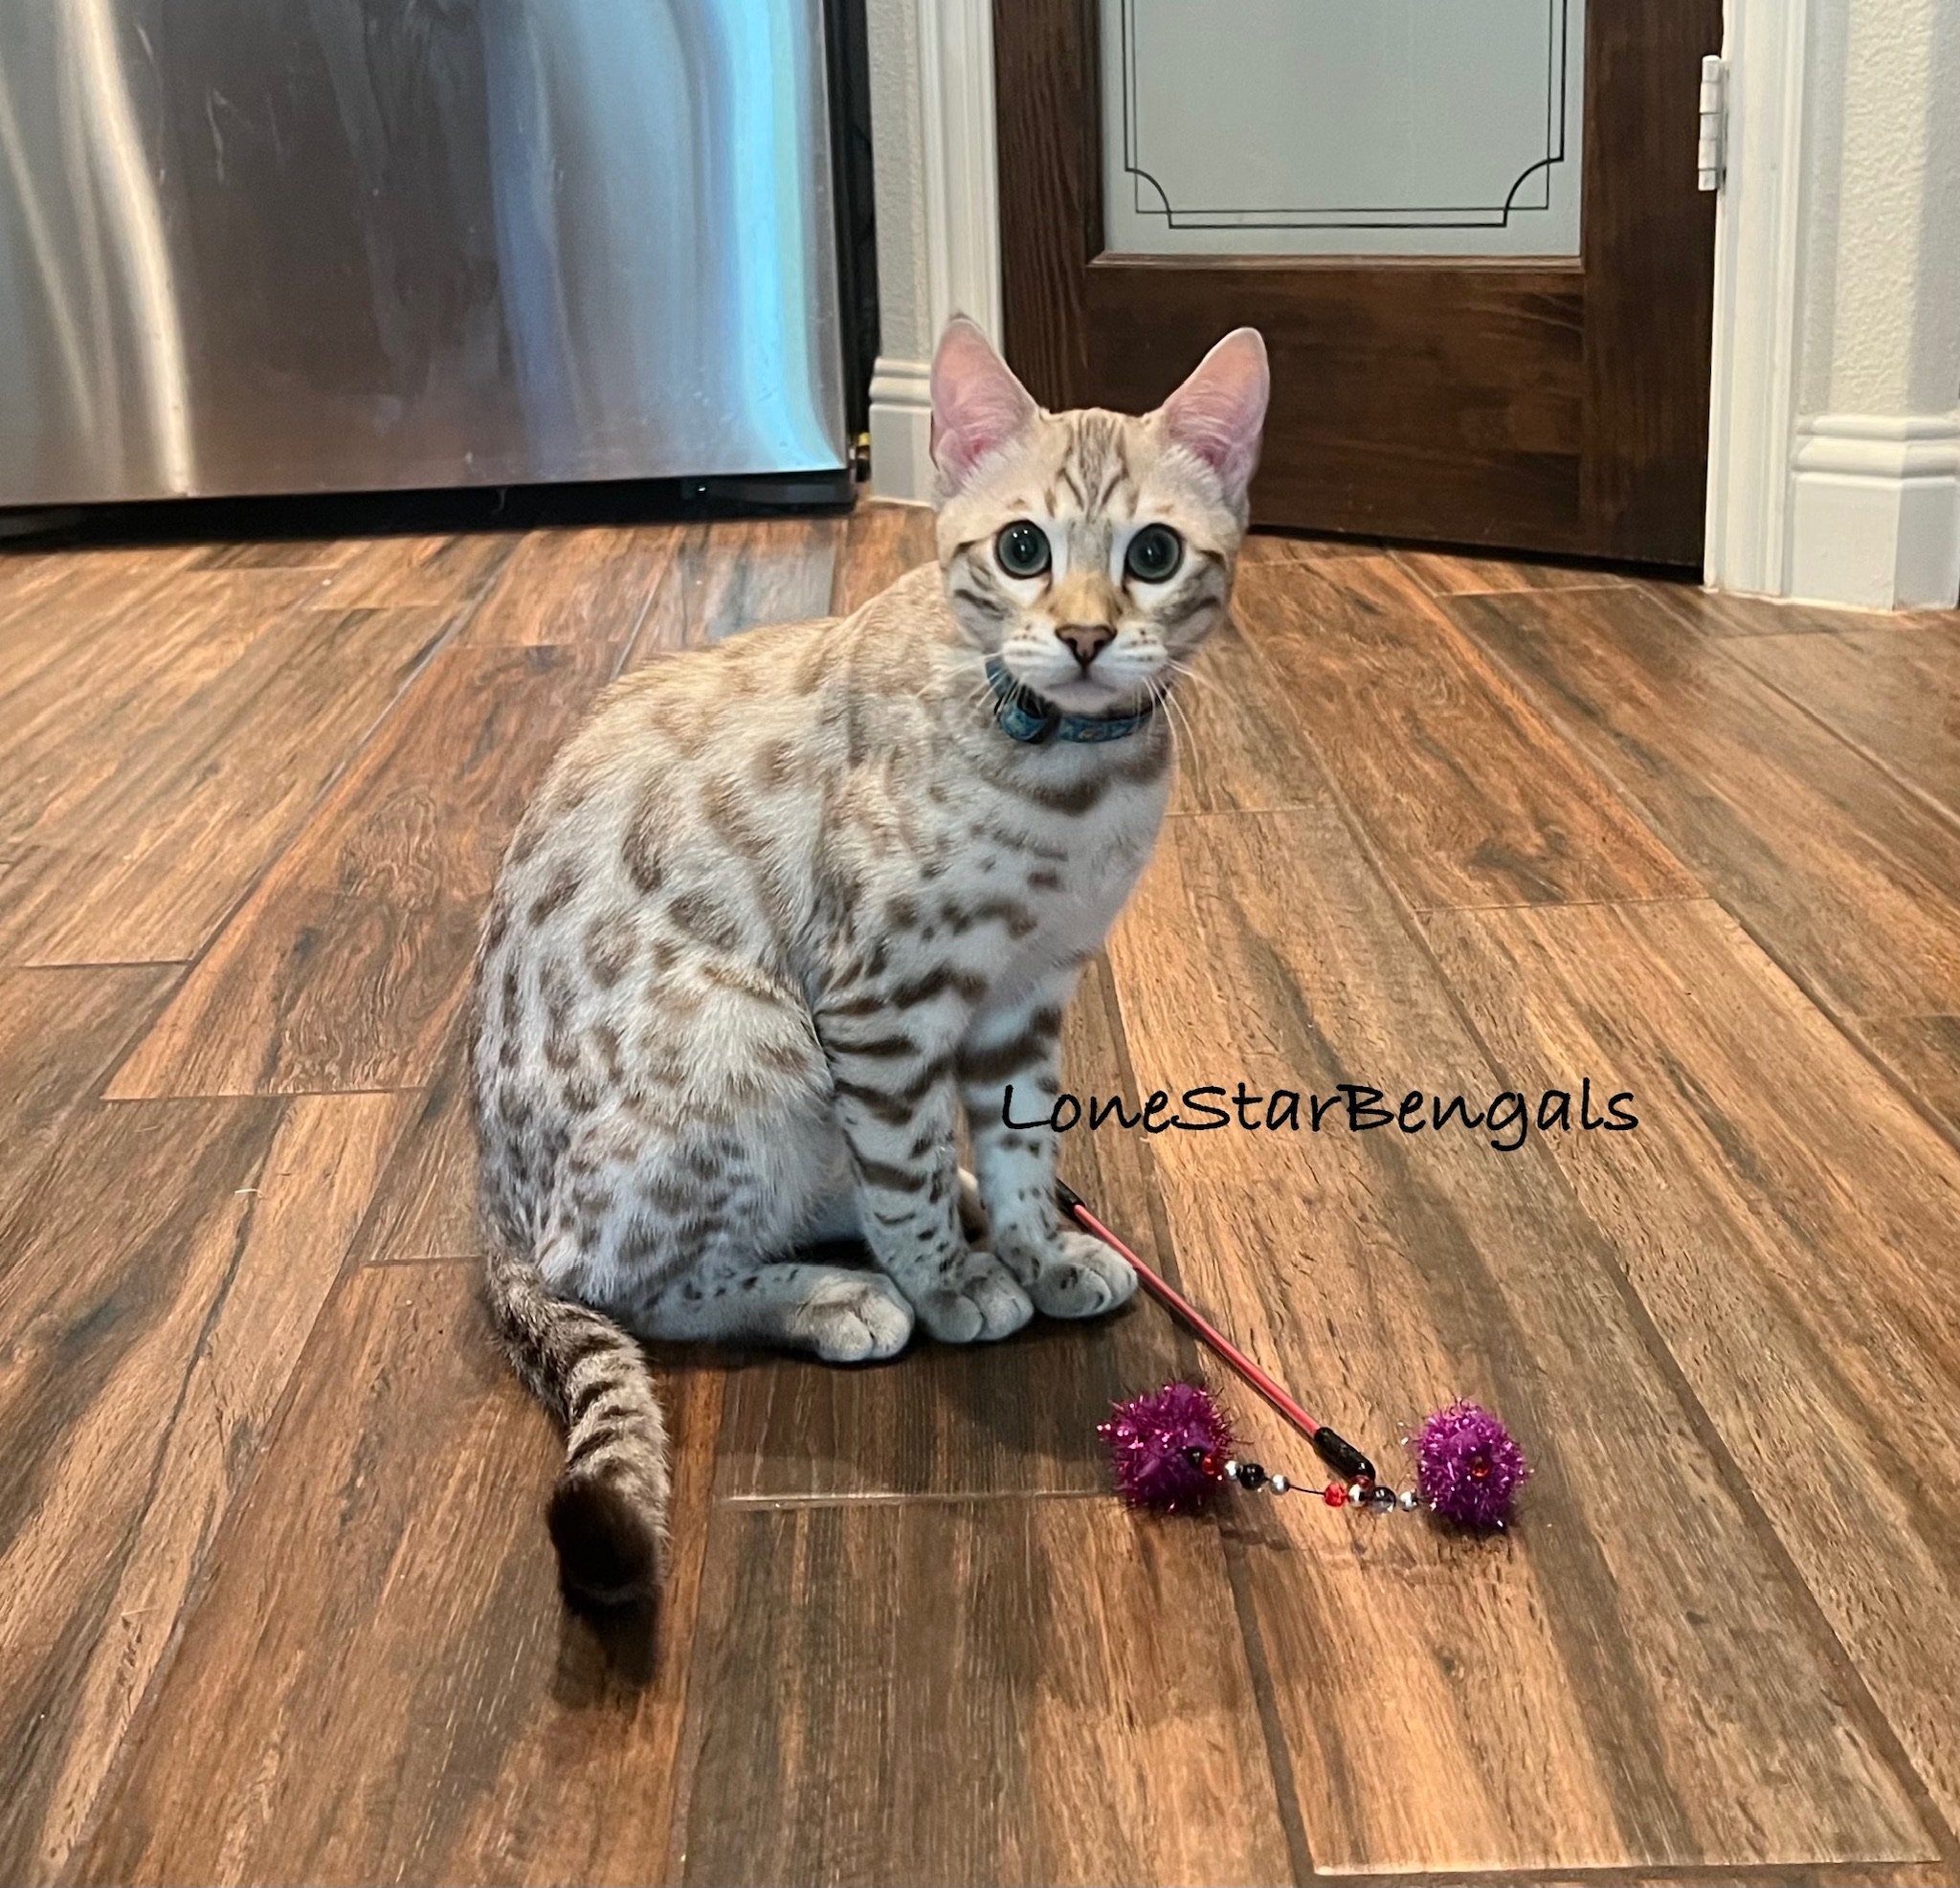 A Superior Quality Bengal from Lone Star Bengal Cats displaying feline passion while playing with a toy on the floor.